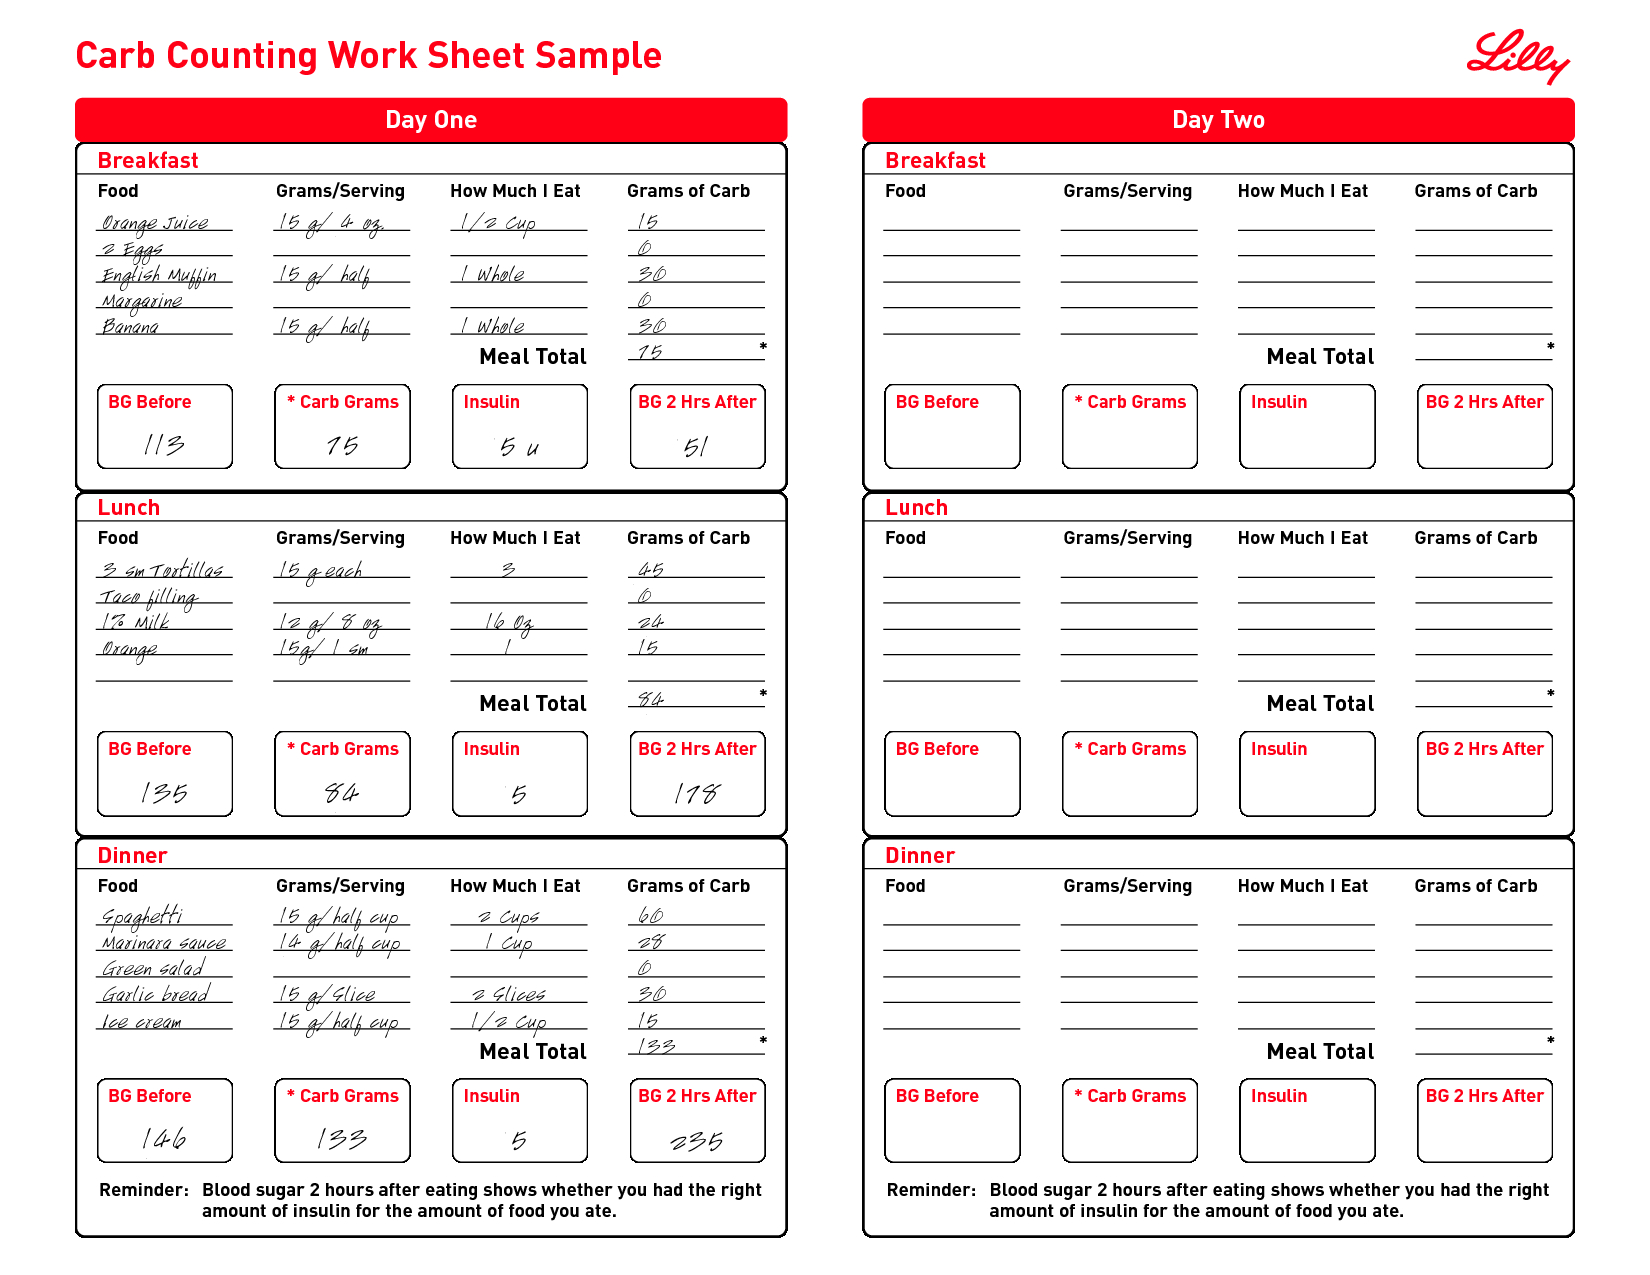 Free Print Carb Counter Chart | Carb Counting Work Sheet Sample - Free Printable Carb Counter Chart